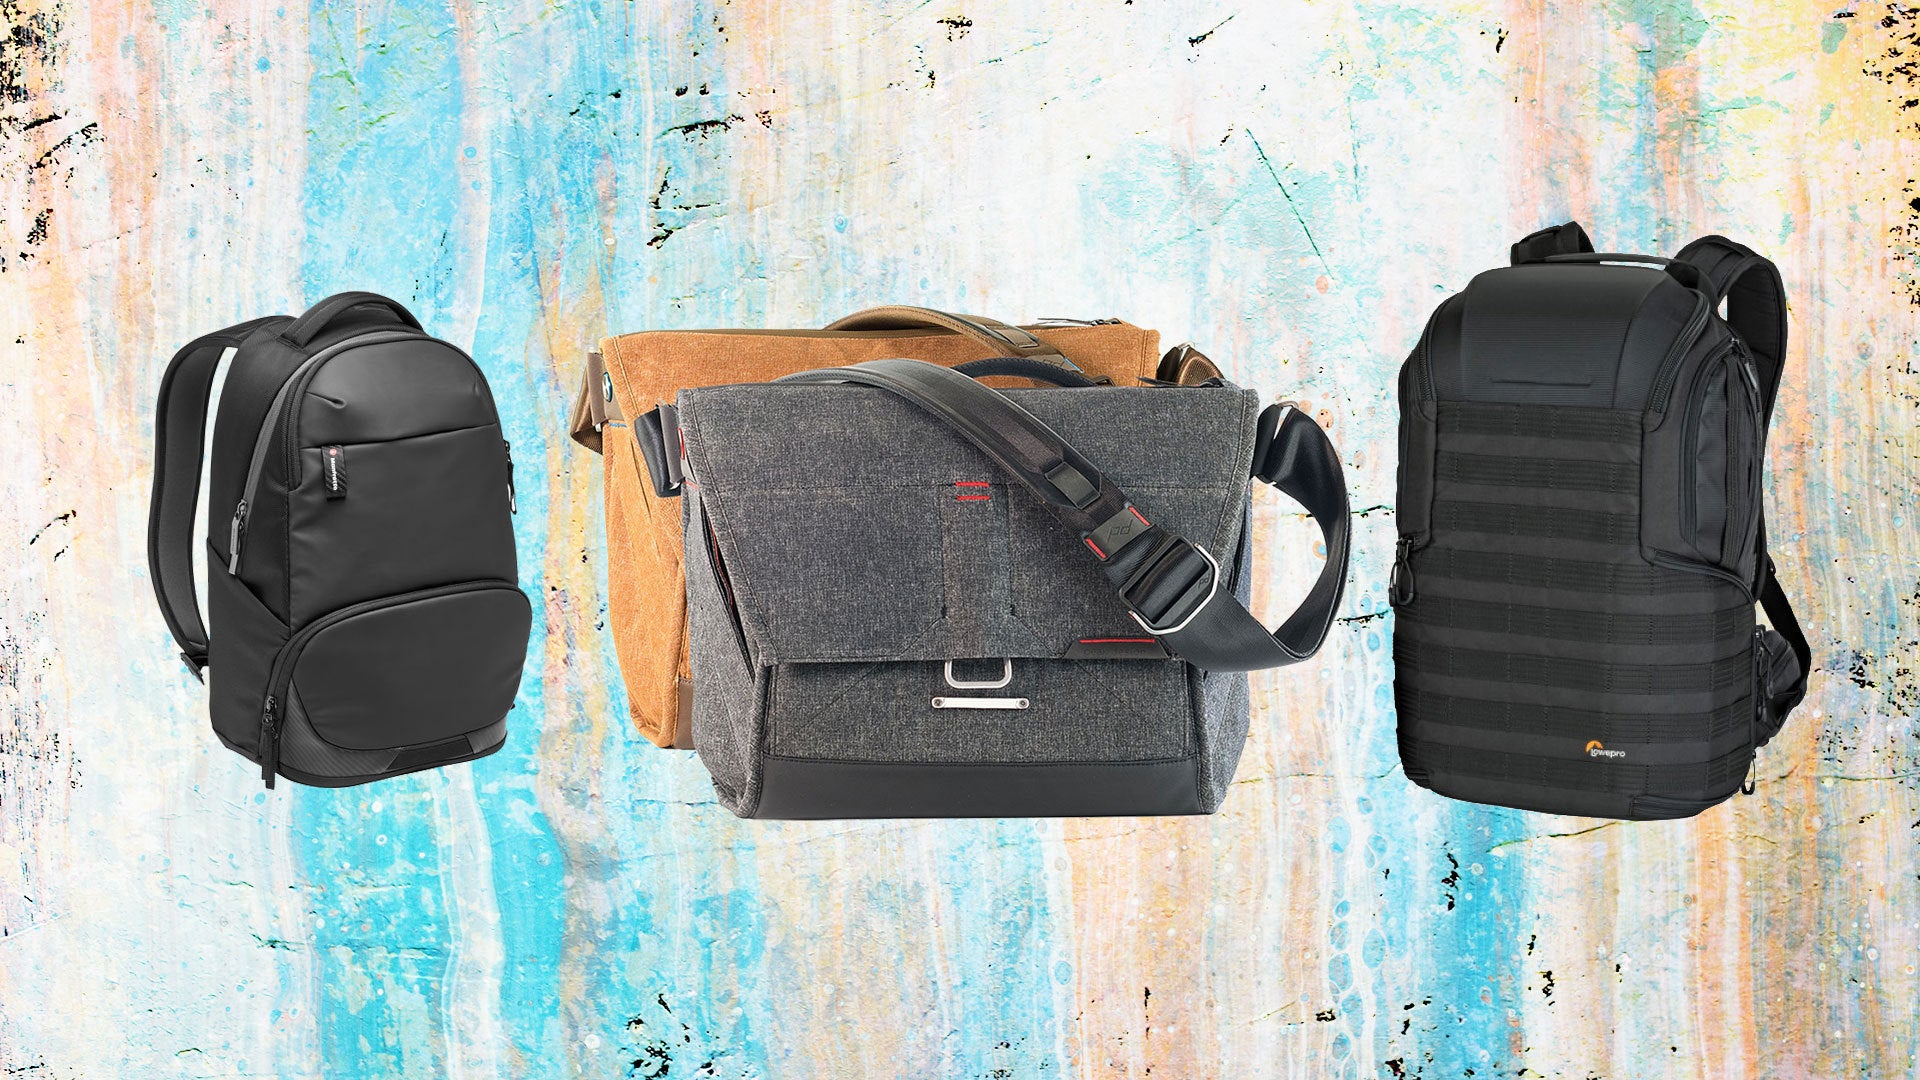 The Most spirited Camera Bags to Raise All Your Photography Gear and Extra